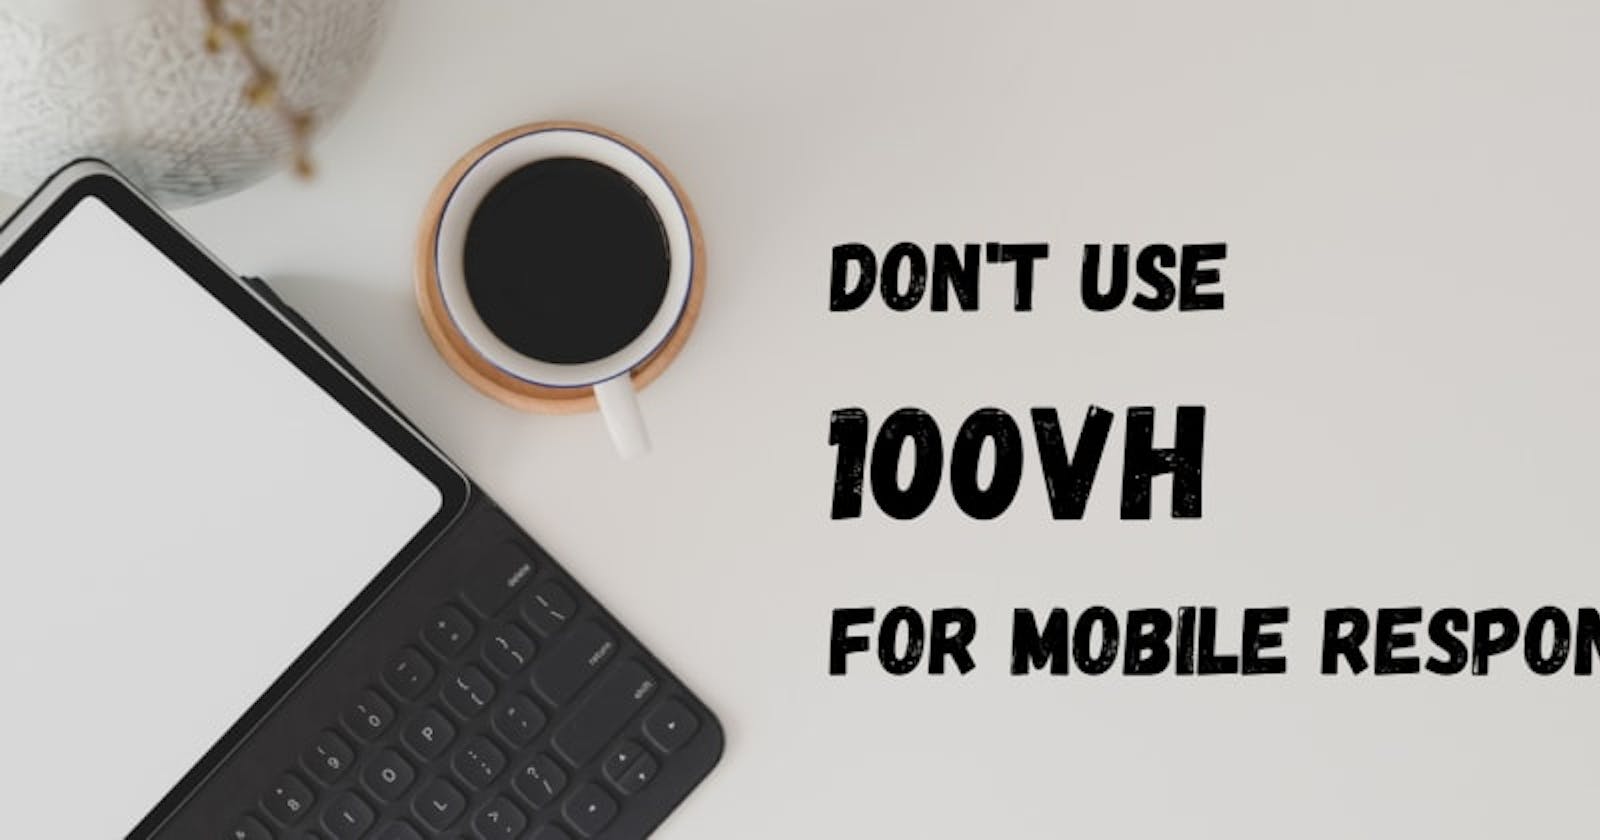 Don't use 100vh for mobile responsive